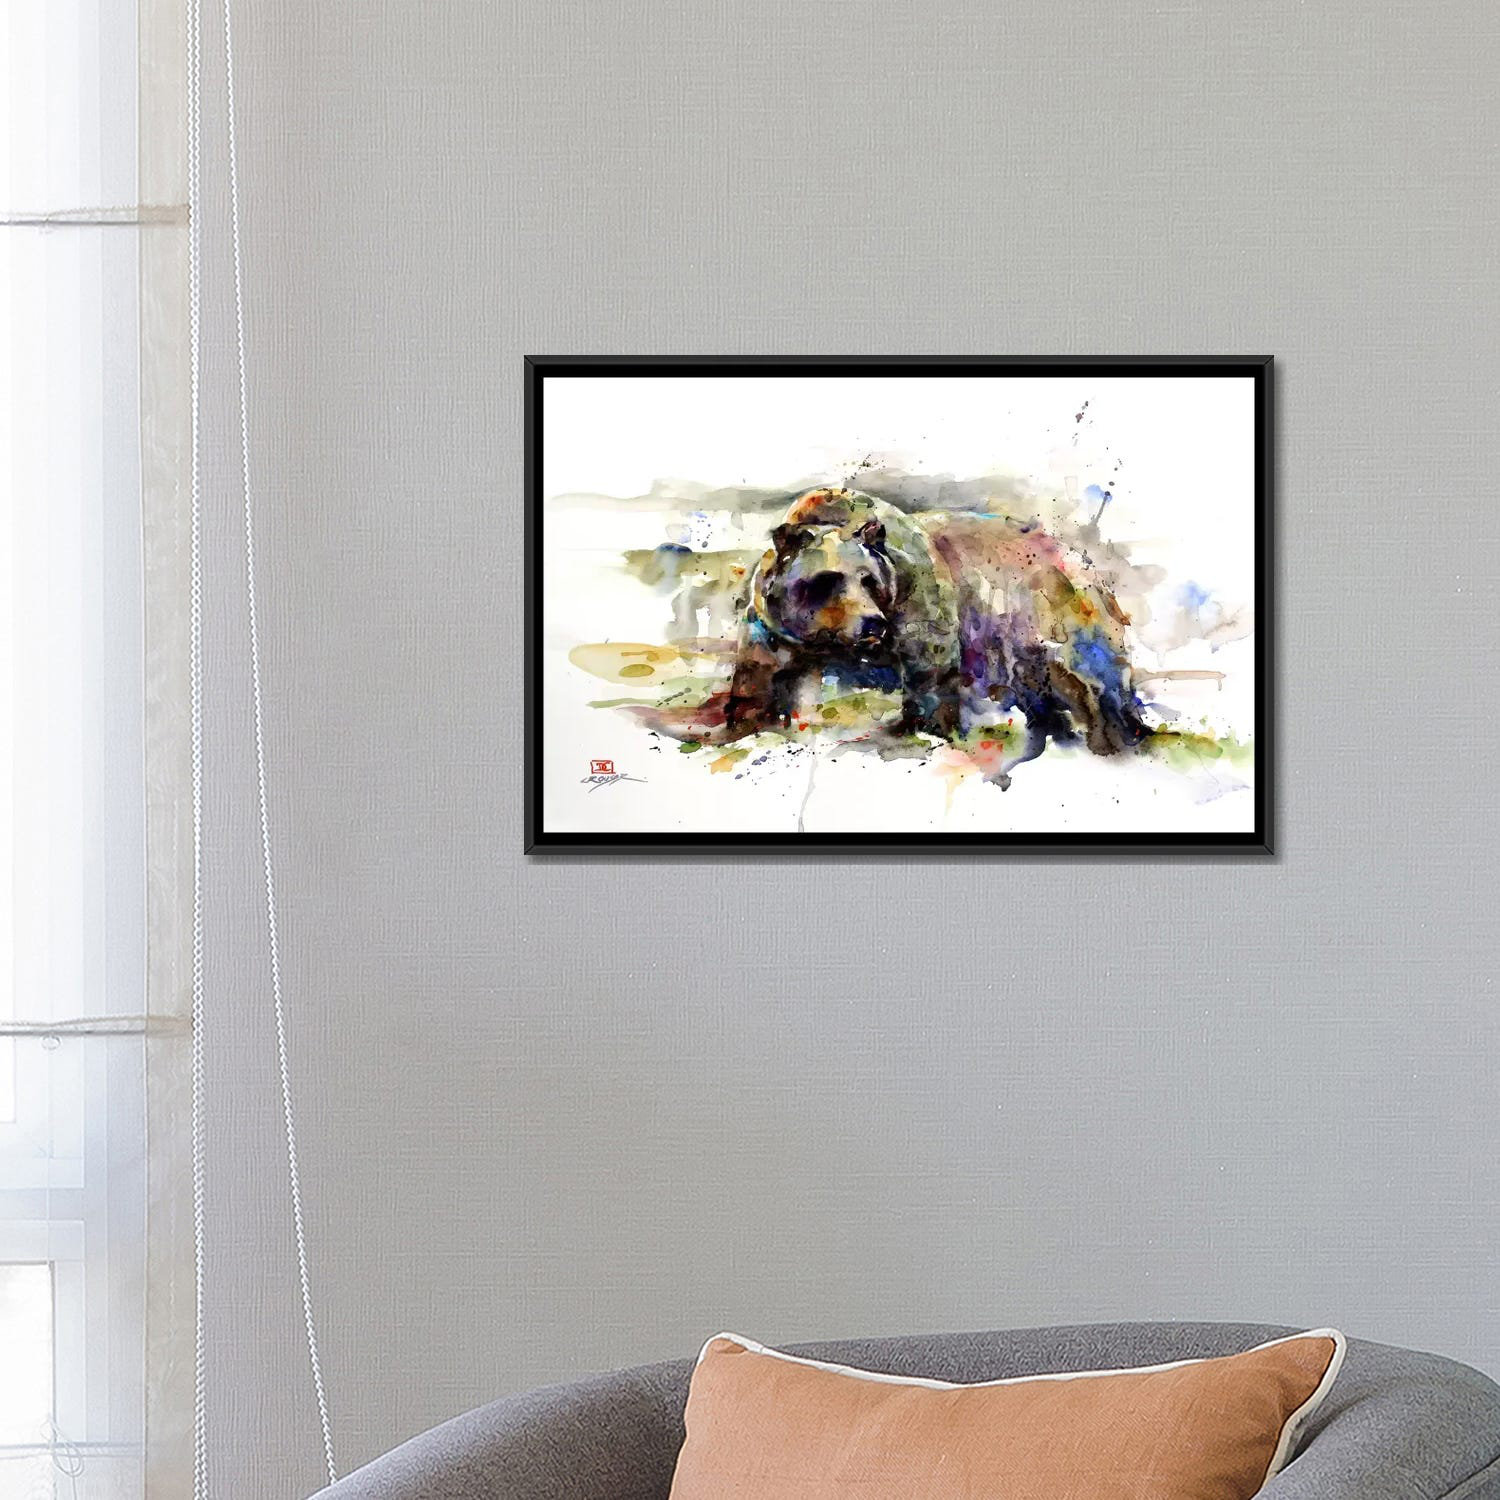 Multi-Colored Bear by Dean Crouser - Gallery Wall Print On Canvas Wrought Studio Size: 18 H x 26 W x 1.5 D